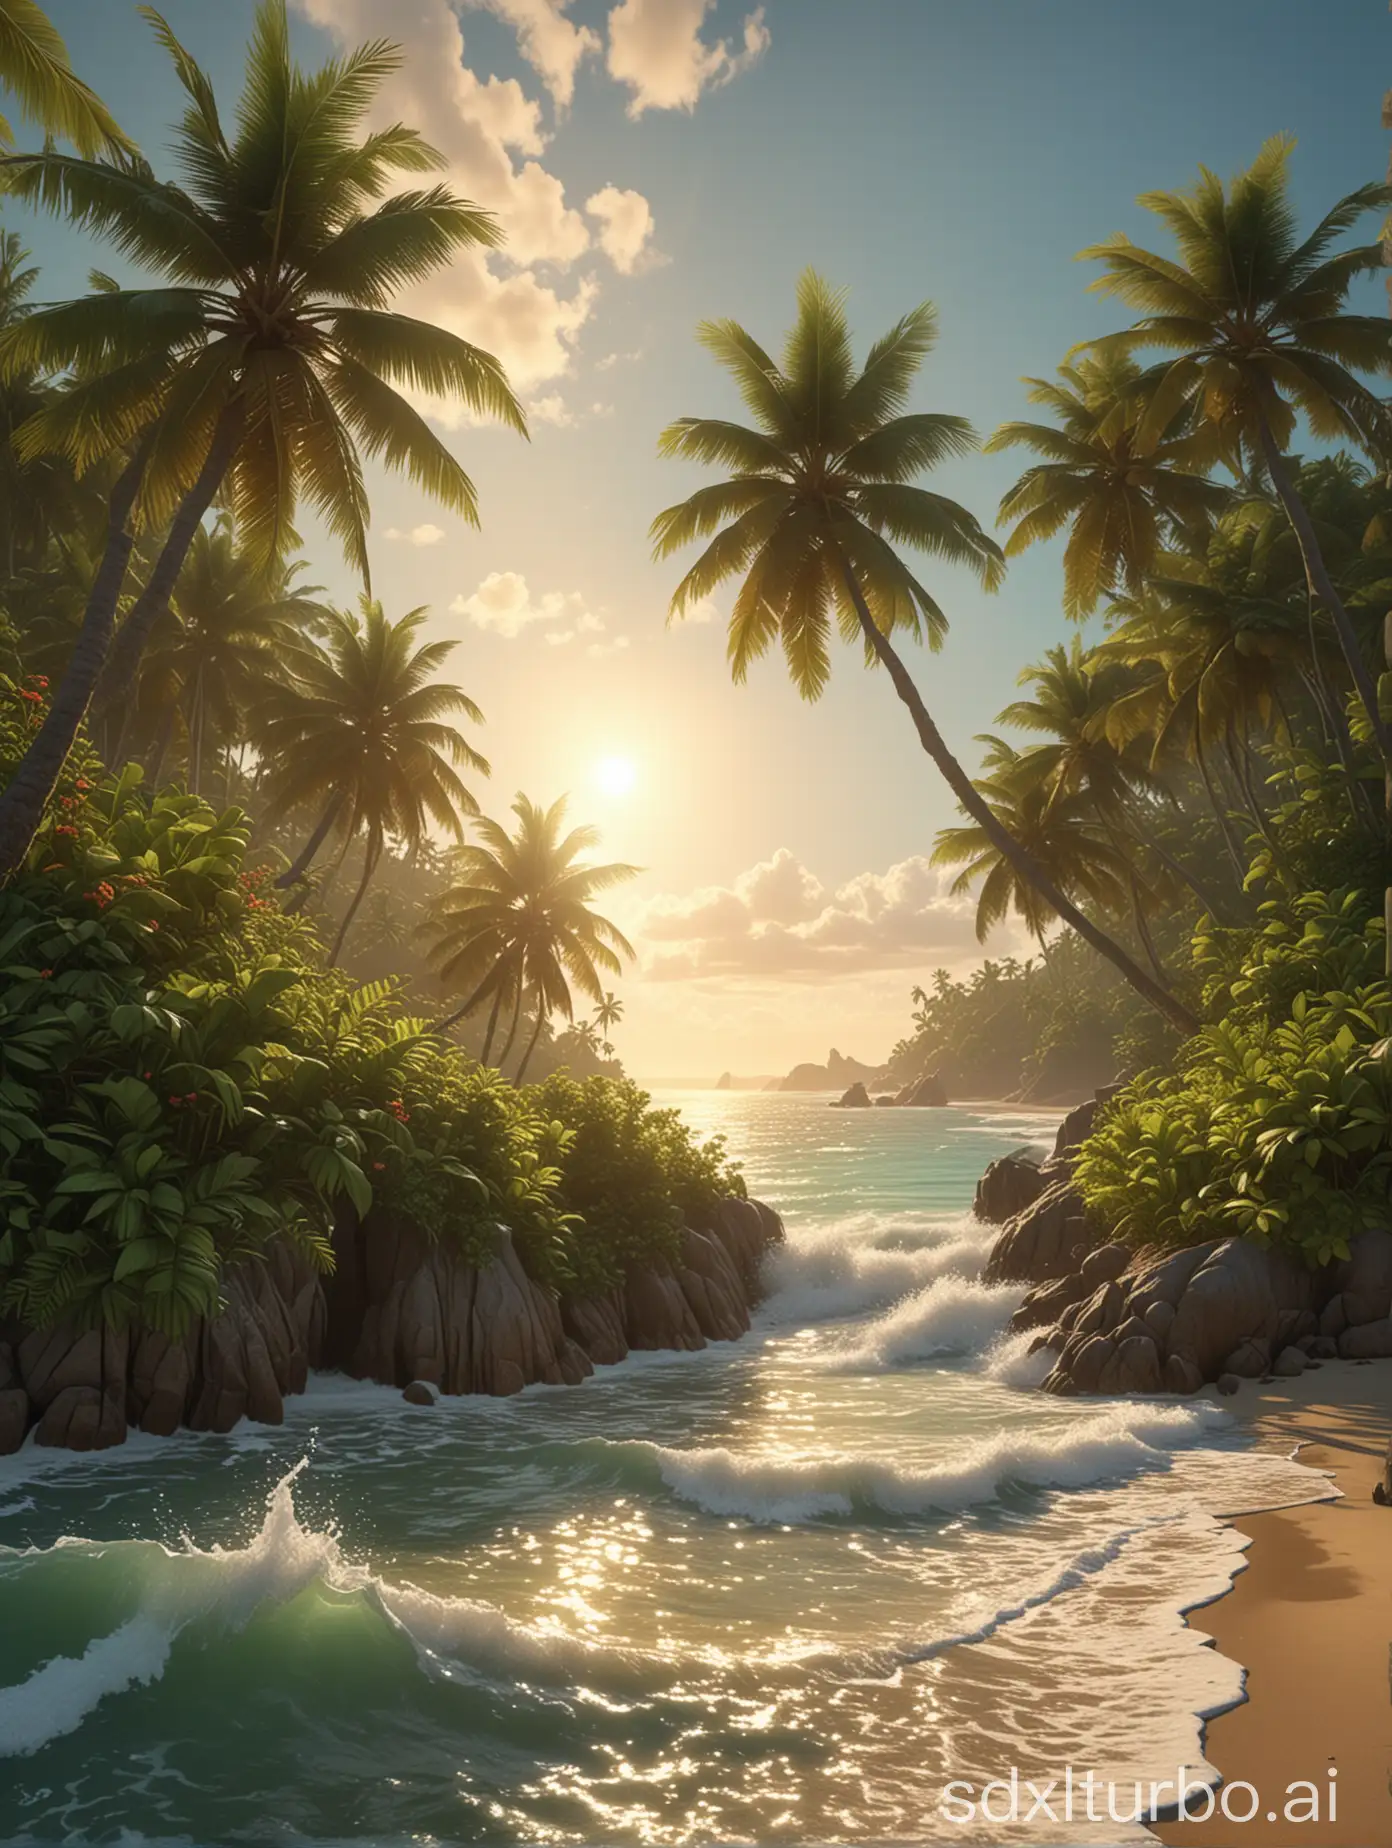 Beach, islands surrounded by coconut trees, green plants, ocean, sun, sunlight, fantasy, lighting effects, profound scenery, hyper-realistic, highly detailed graphics, pop art, 8K, author Evgeny Lushpin